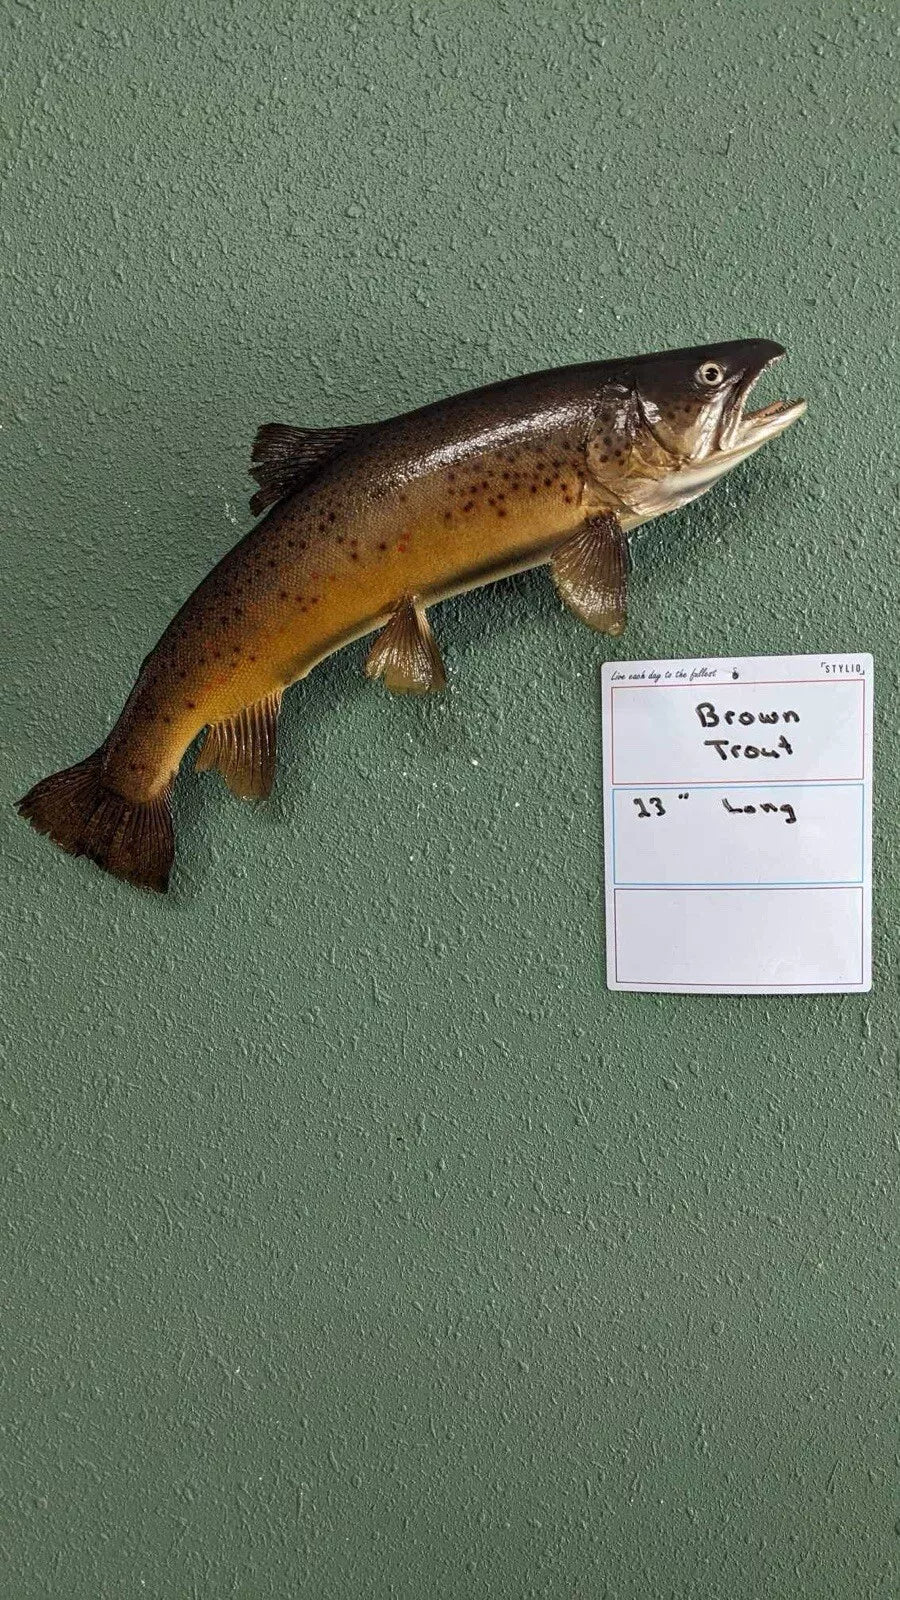 Beautiful Real Skin 23 inch Brown Trout Taxidermy Wall Mount